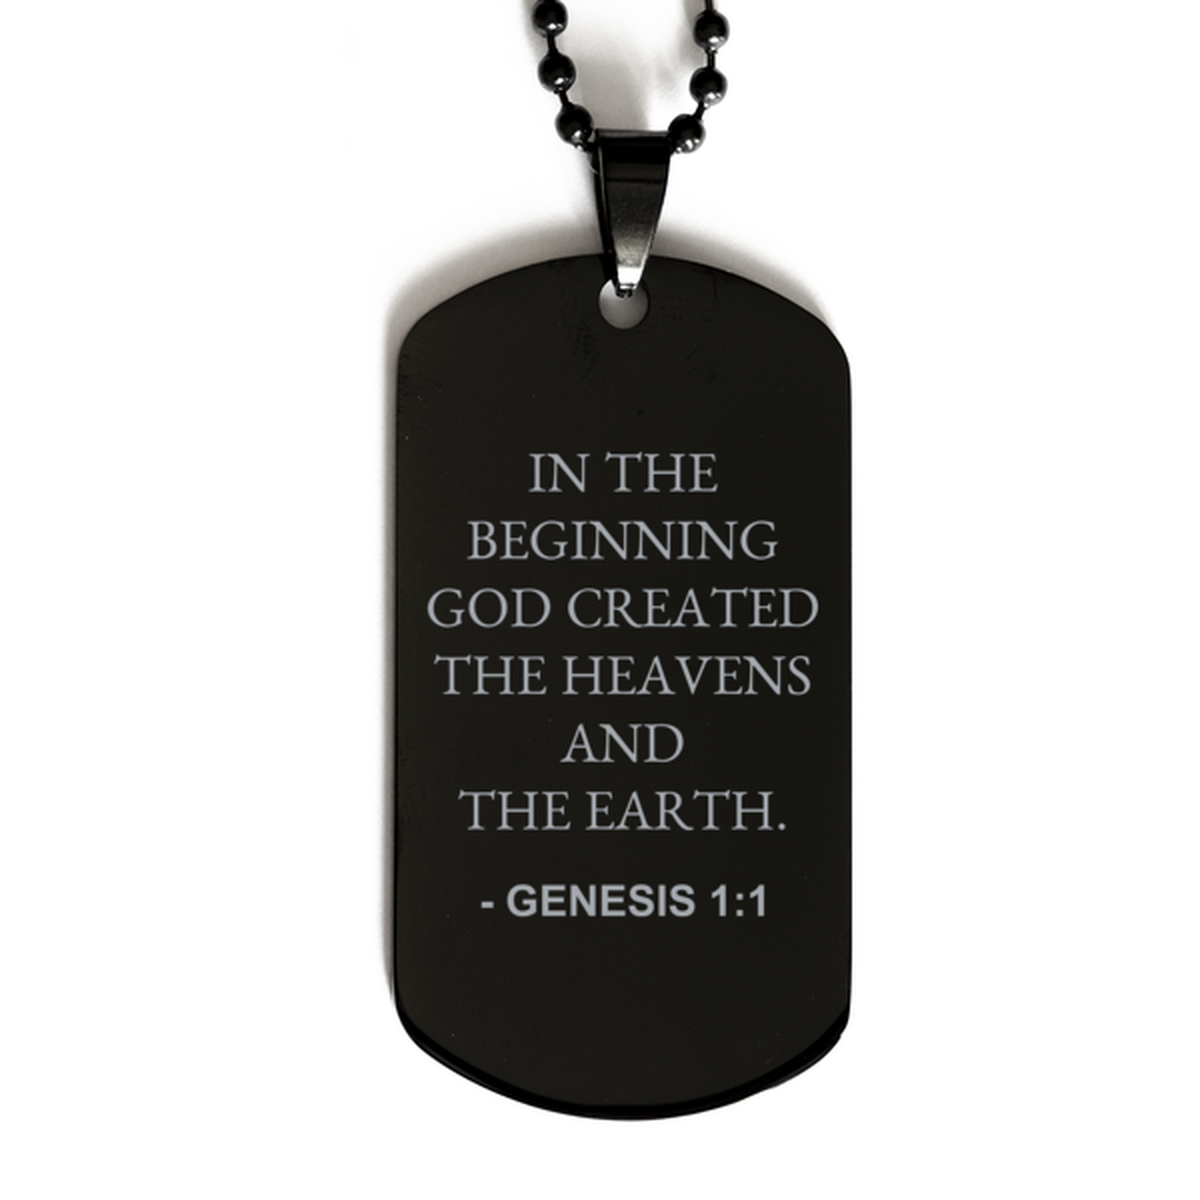 Bible Verse Black Dog Tag, Genesis 1:1 In The Beginning God Created The Heavens And, Christian Inspirational Necklace Gifts For Men Women